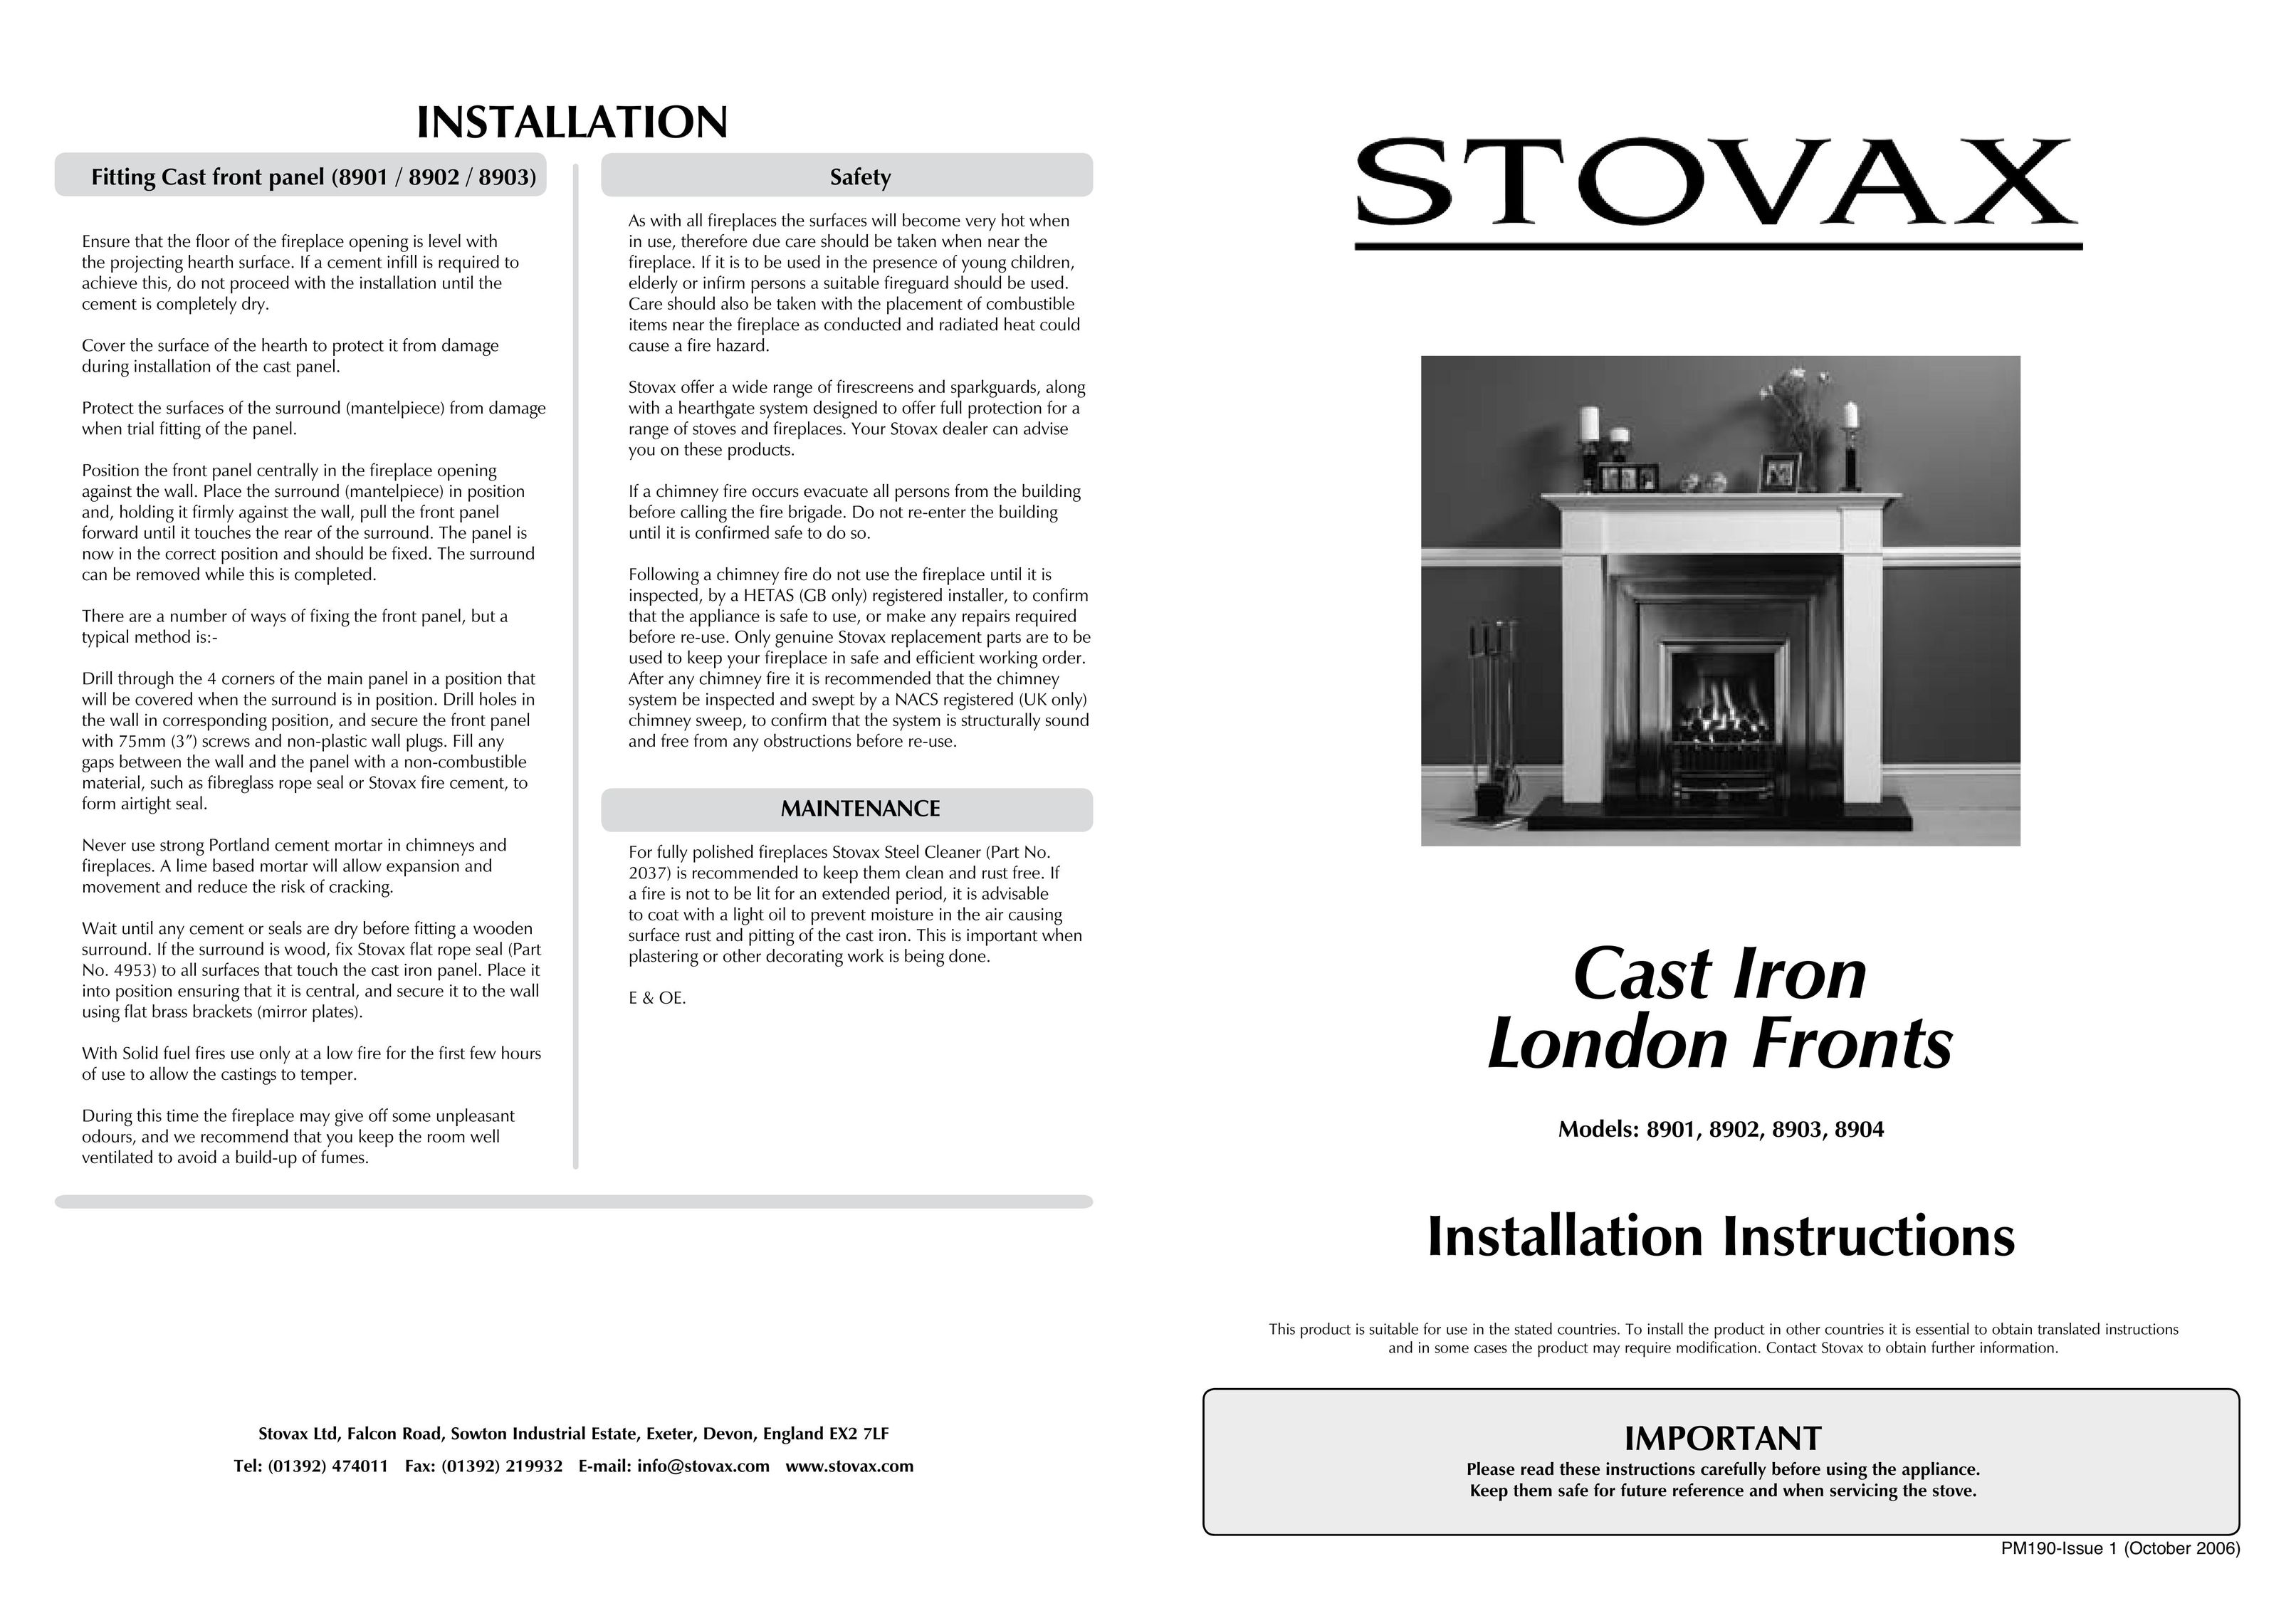 Stovax 8903 Indoor Fireplace User Manual